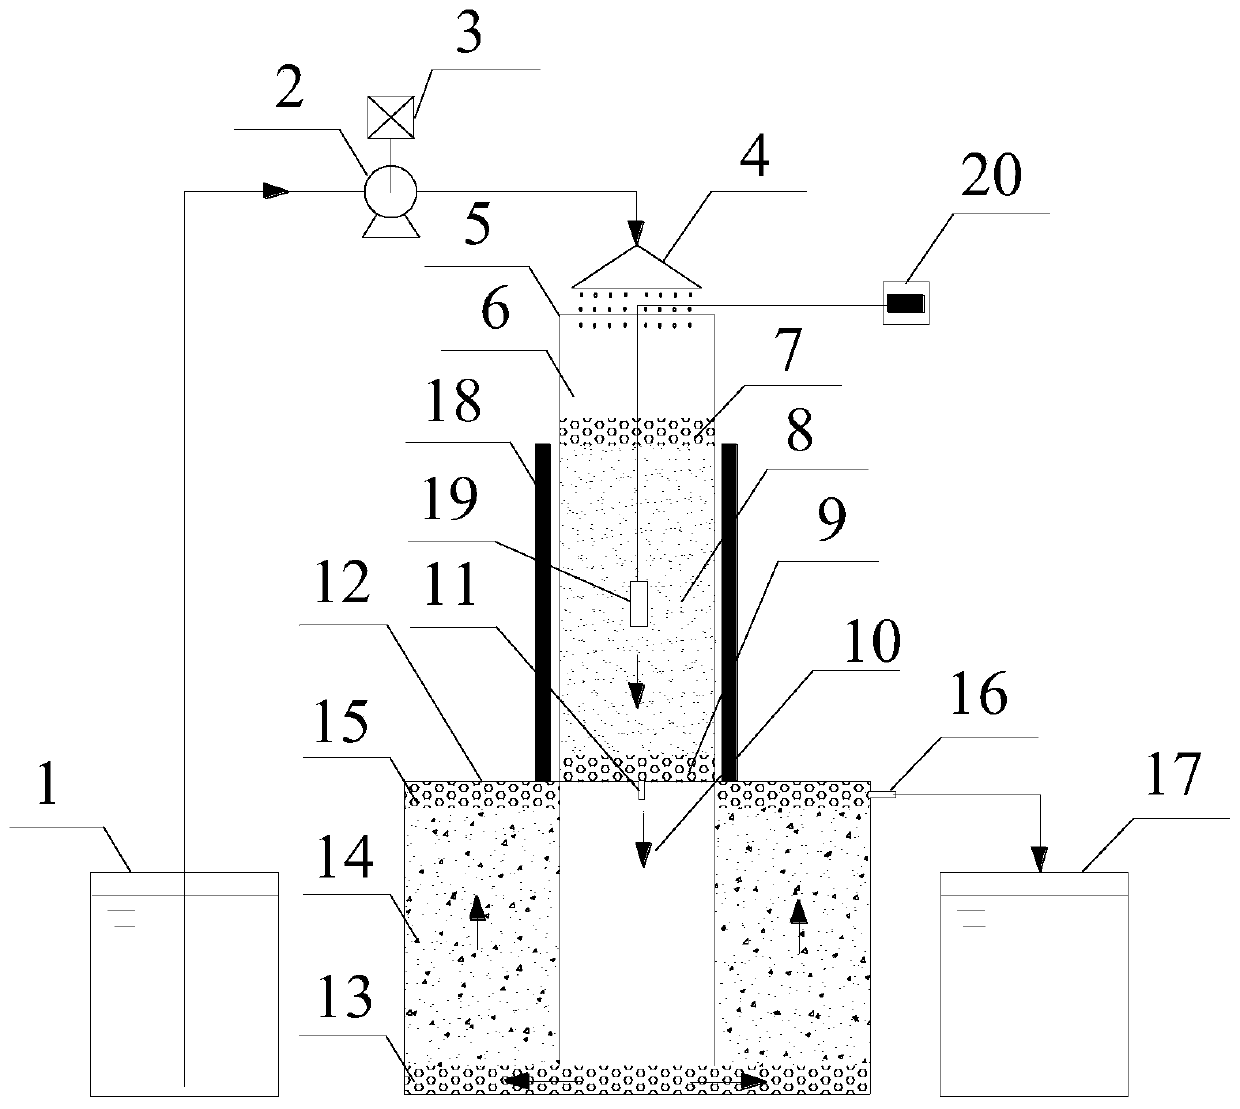 Double-tank artificial rapid infiltration system and method used for high-efficiency denitrification of sewage with low C/N ratio